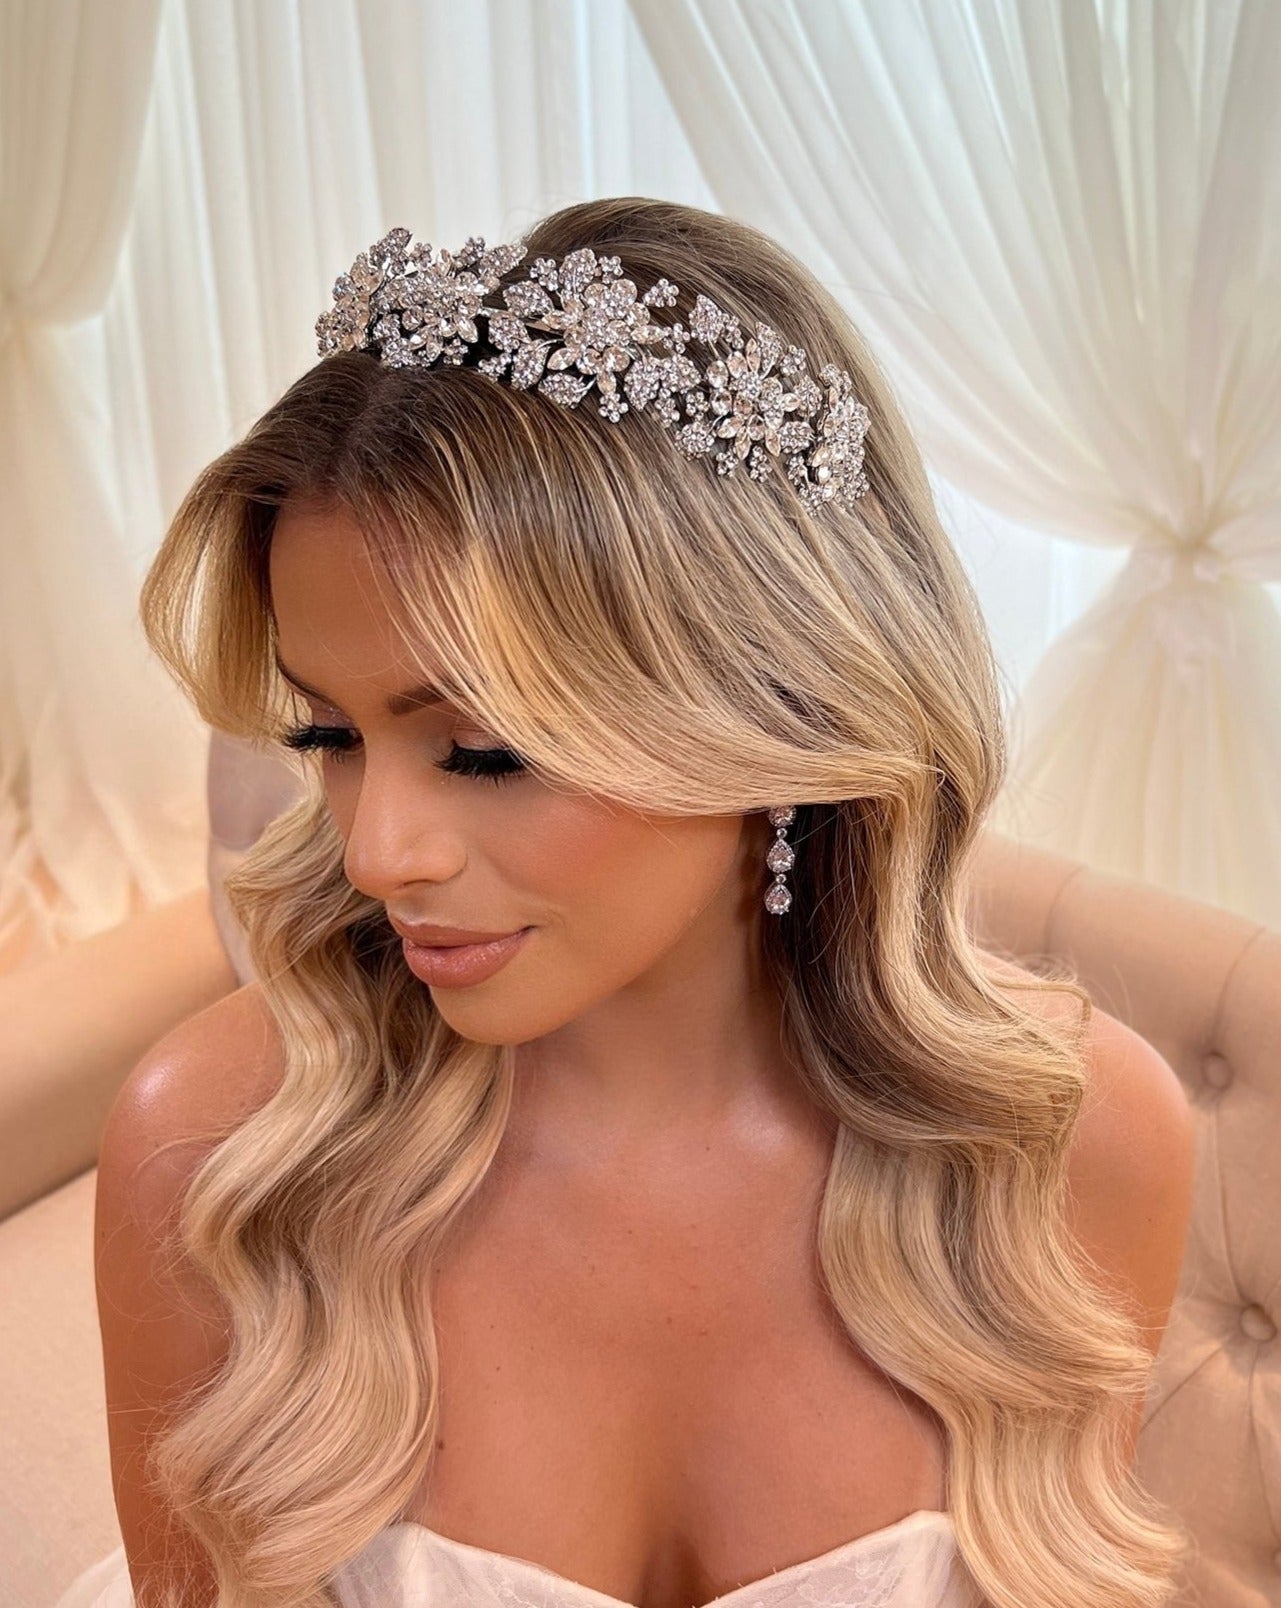 female model wearing floral bridal headband with various crystal flowers and small clusters